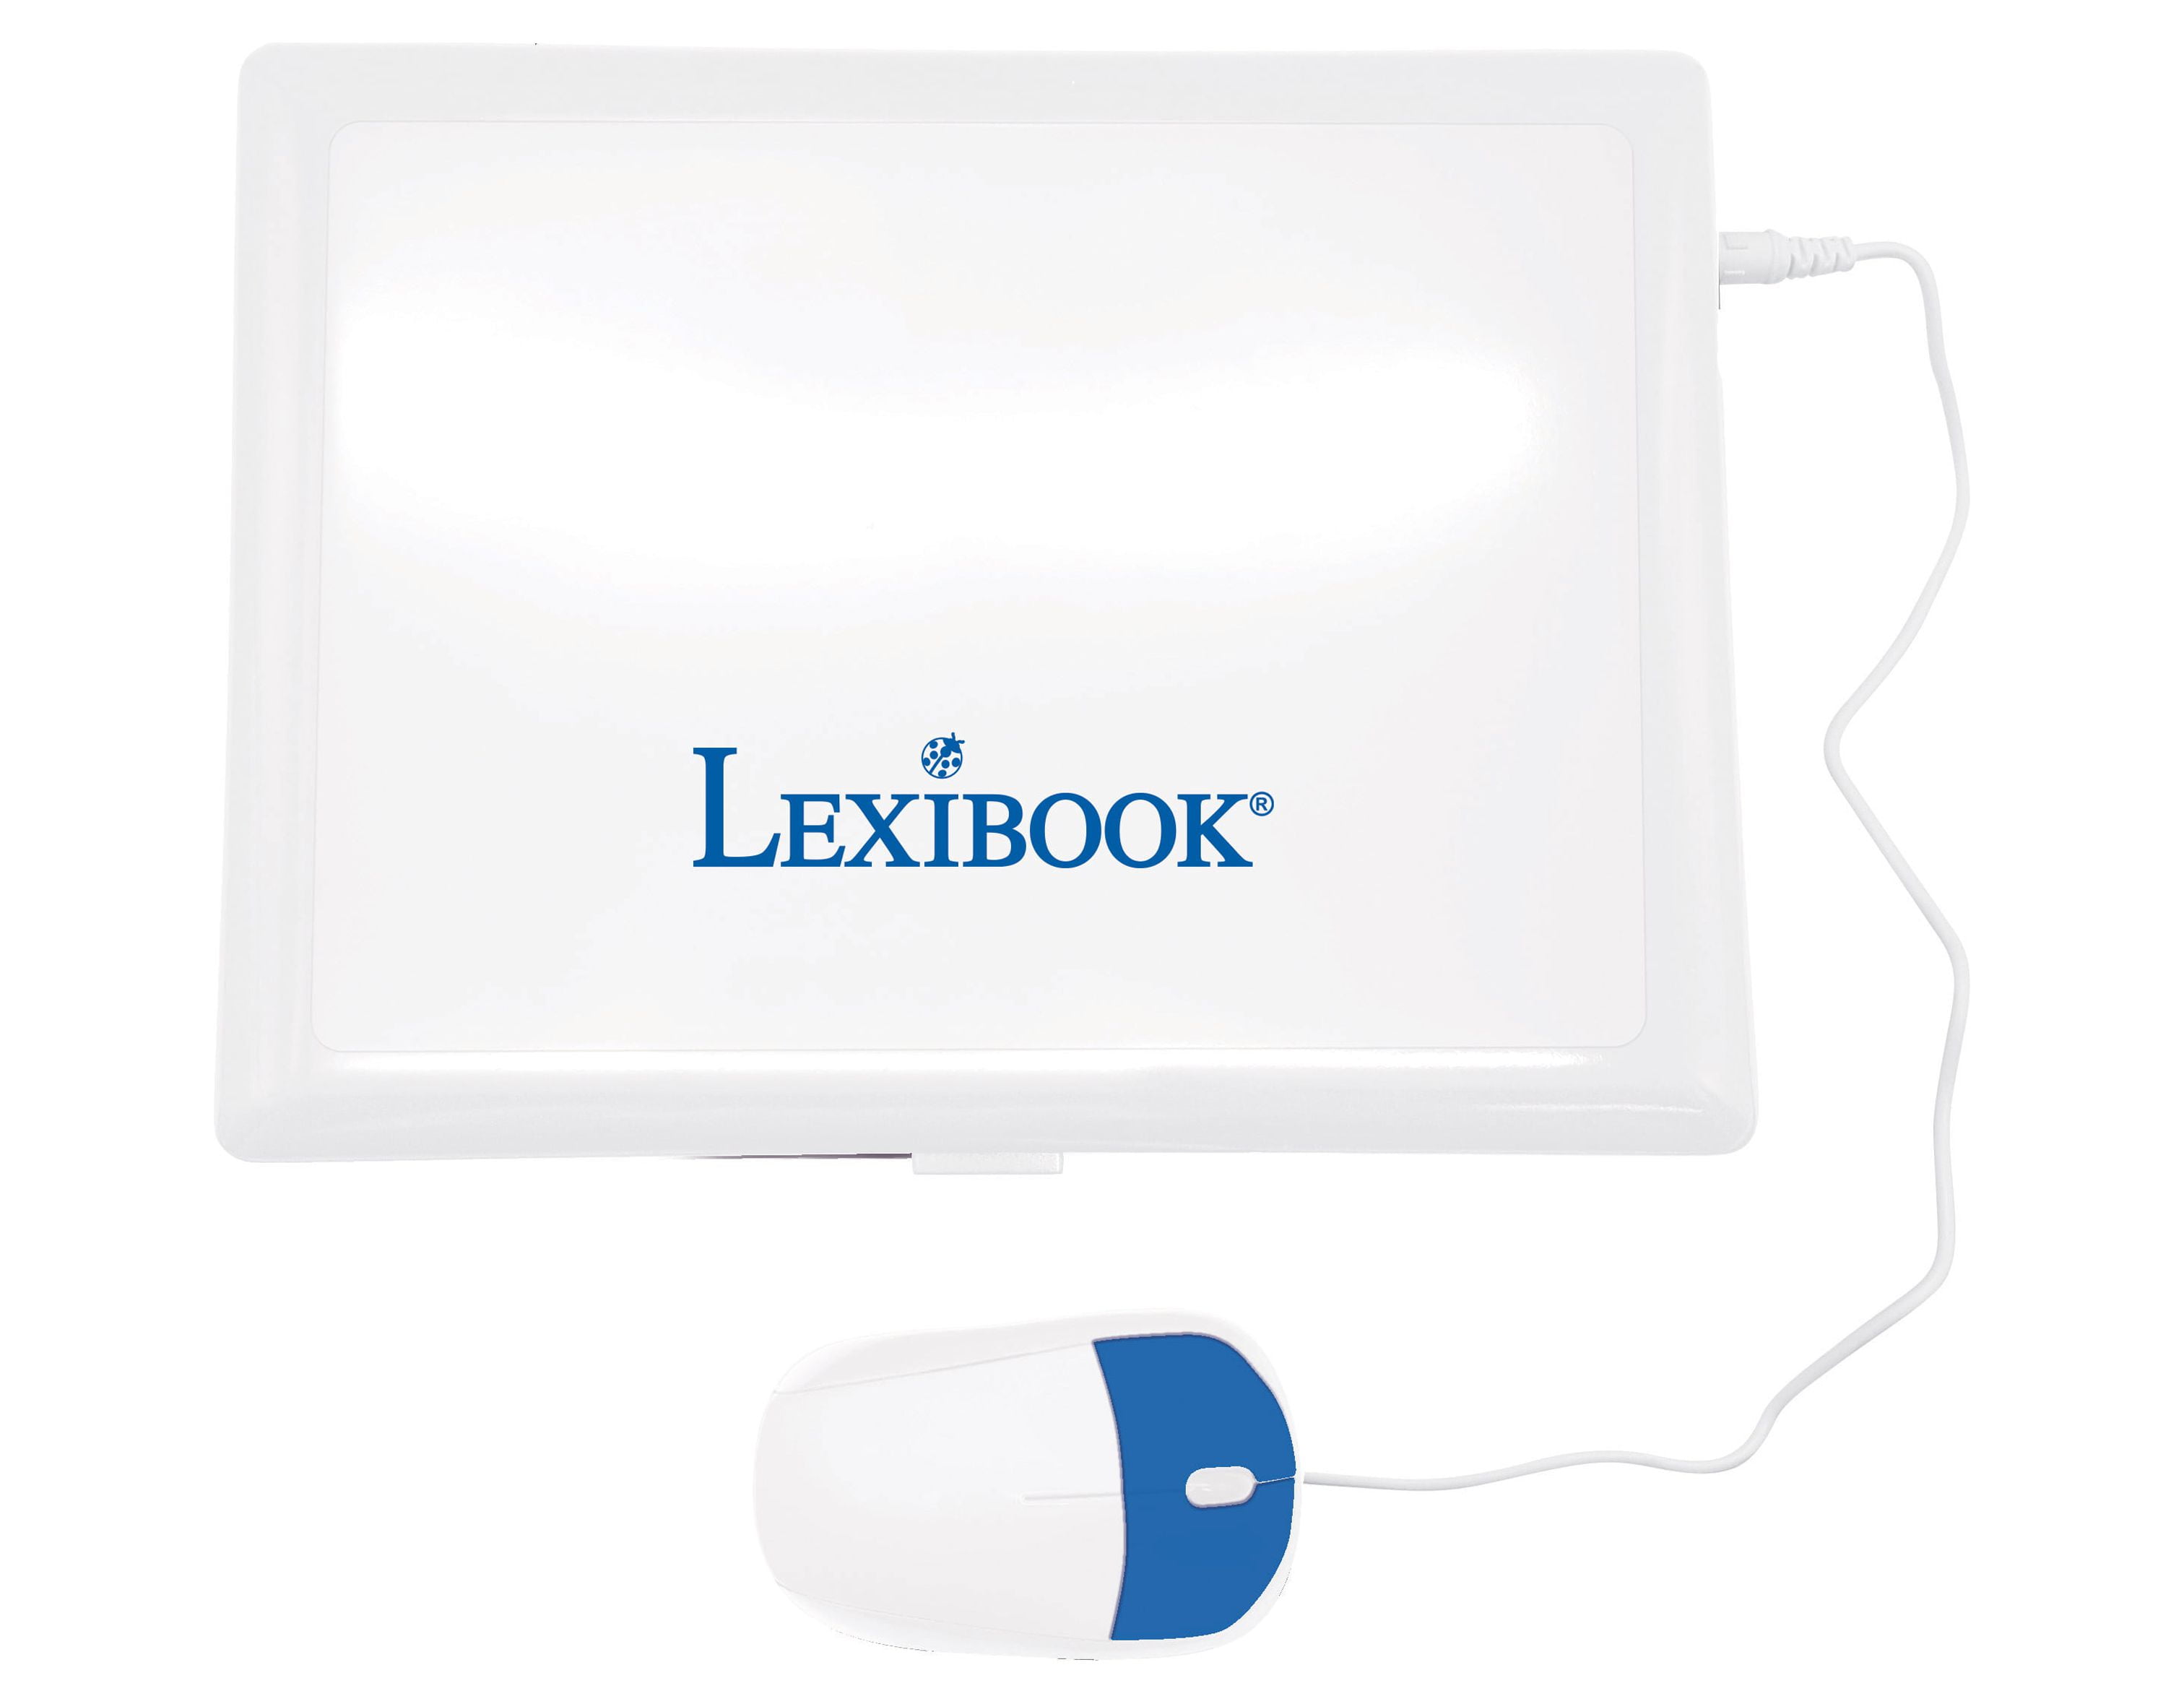 LEXiBOOK LAPTAB® 10, Laptop with Touch Screen, Designed for The Whole  Family, Educational and Fun Content, Powered by Android™, Parental Control